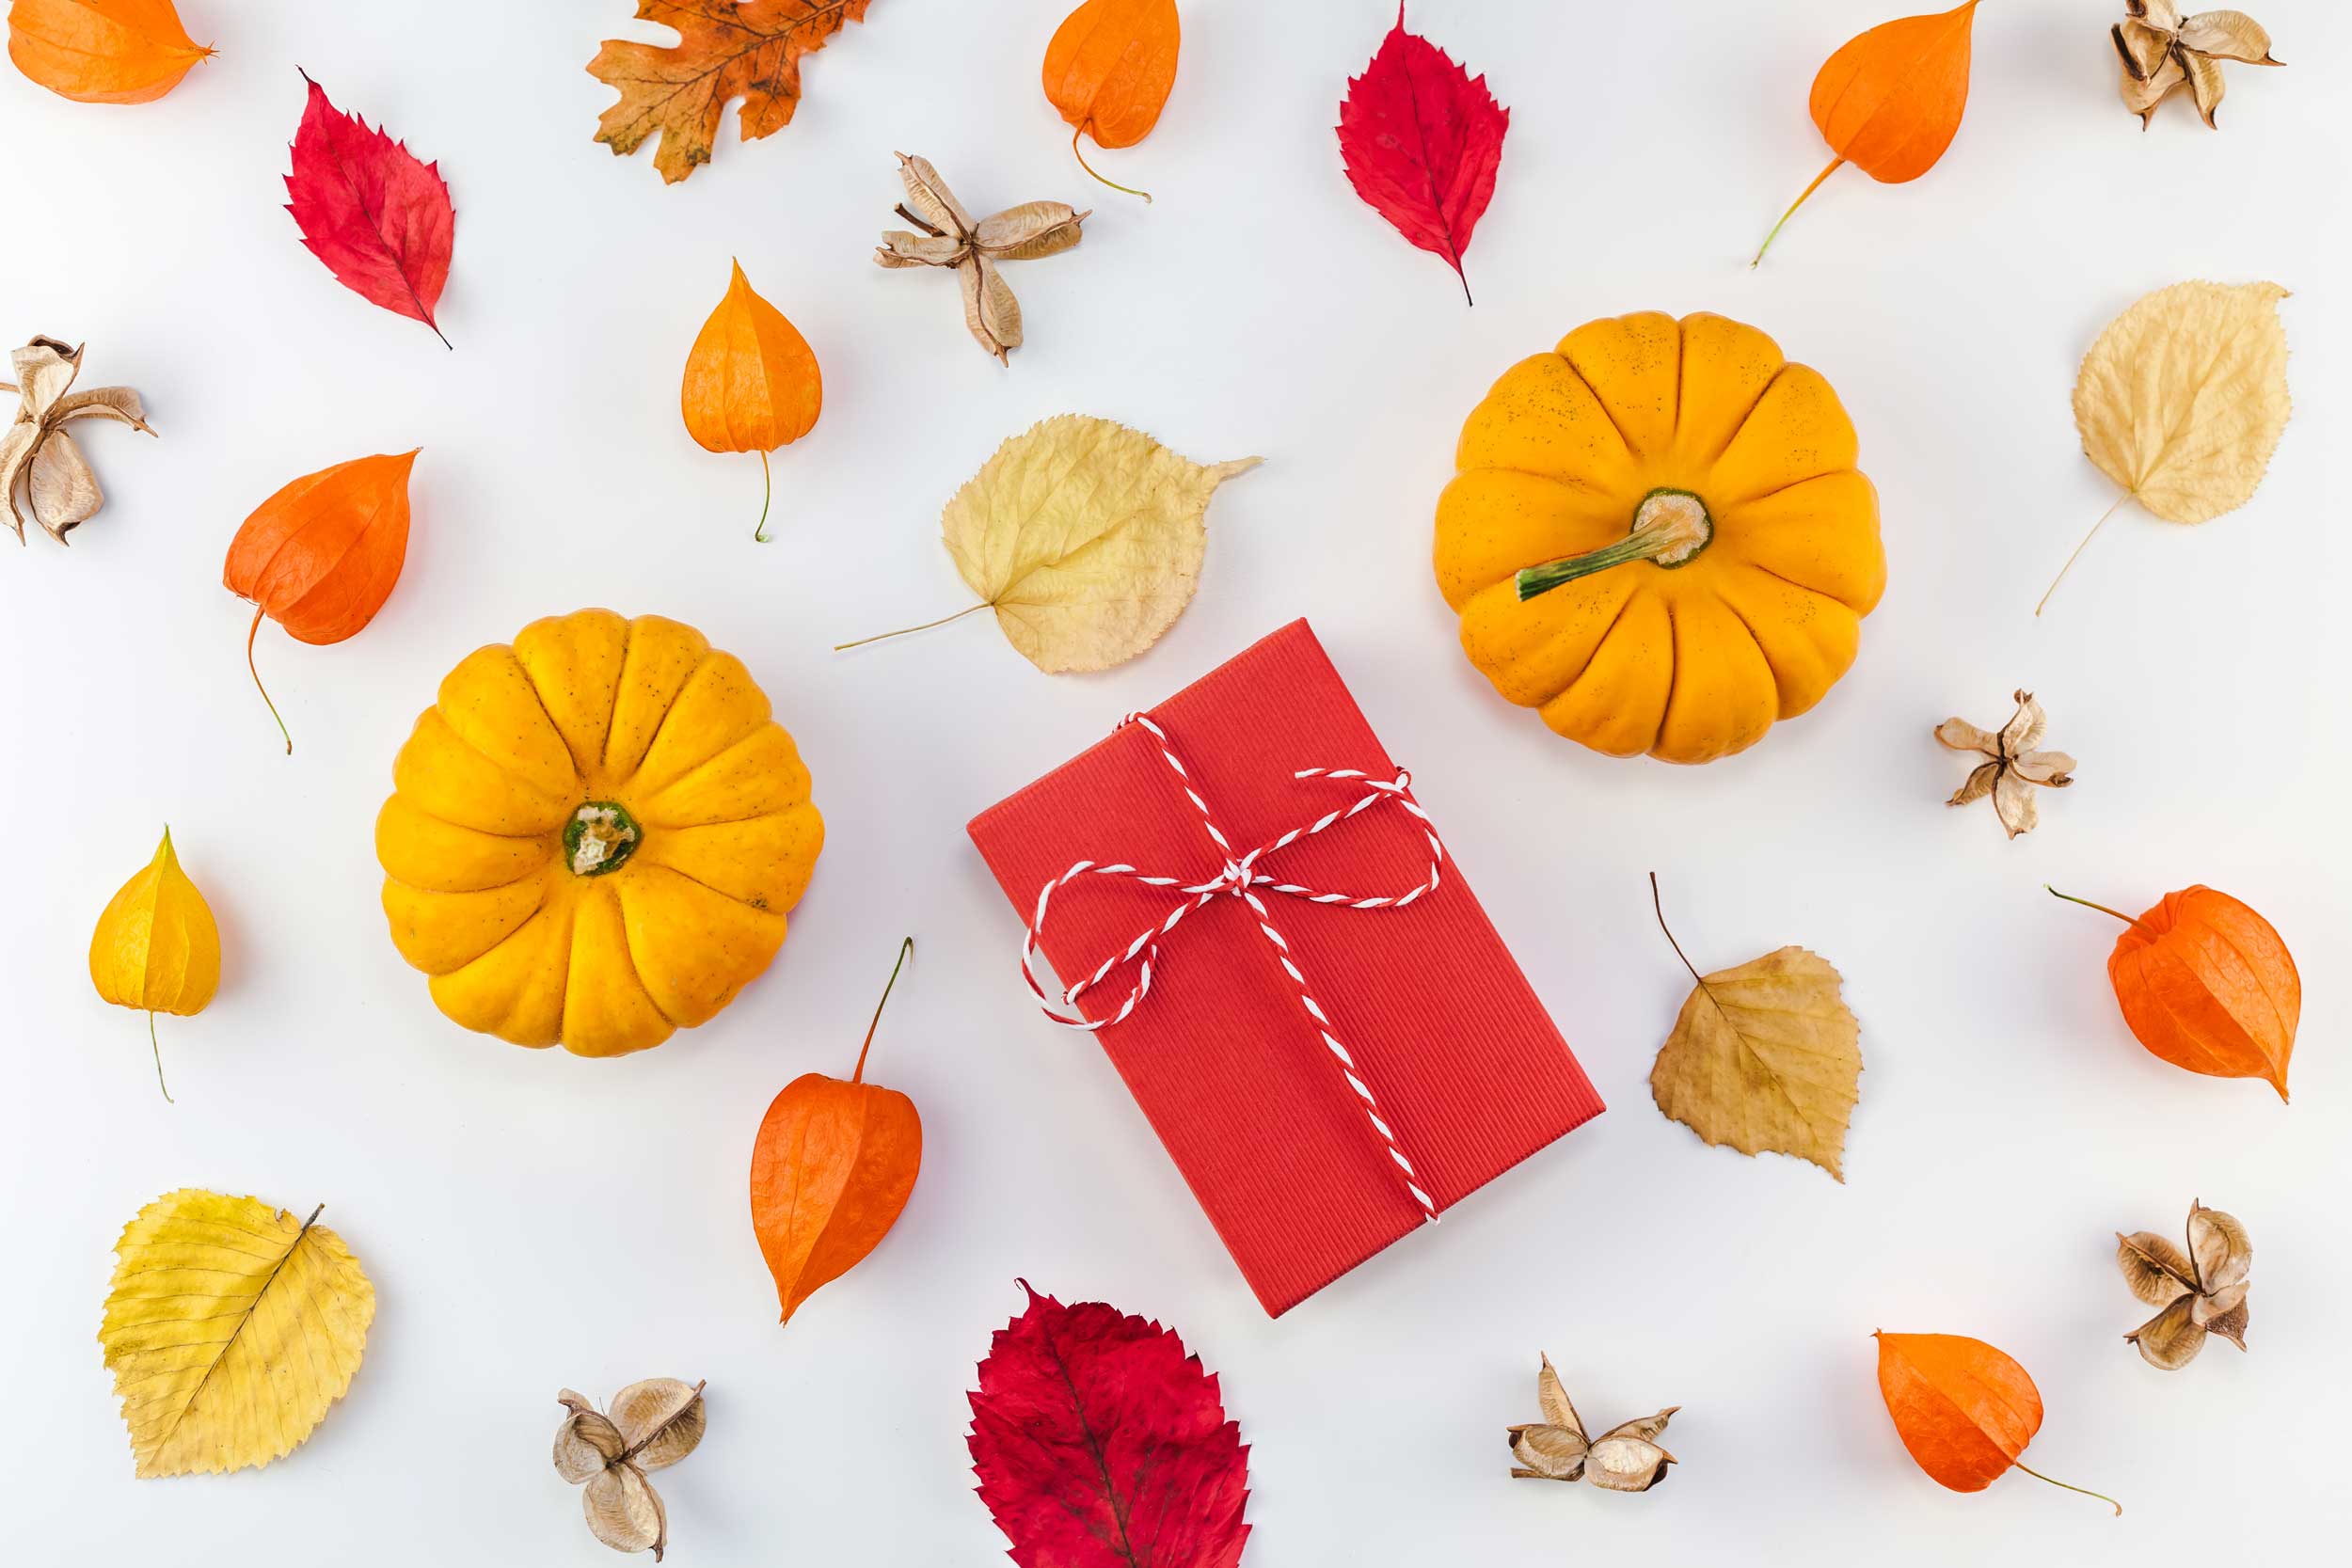 creative-top-view-flat-lay-autumn-composition-pumpkins-dried-orange-flowers-leaves-red-gift-box_t20_BlPRmO.jpg